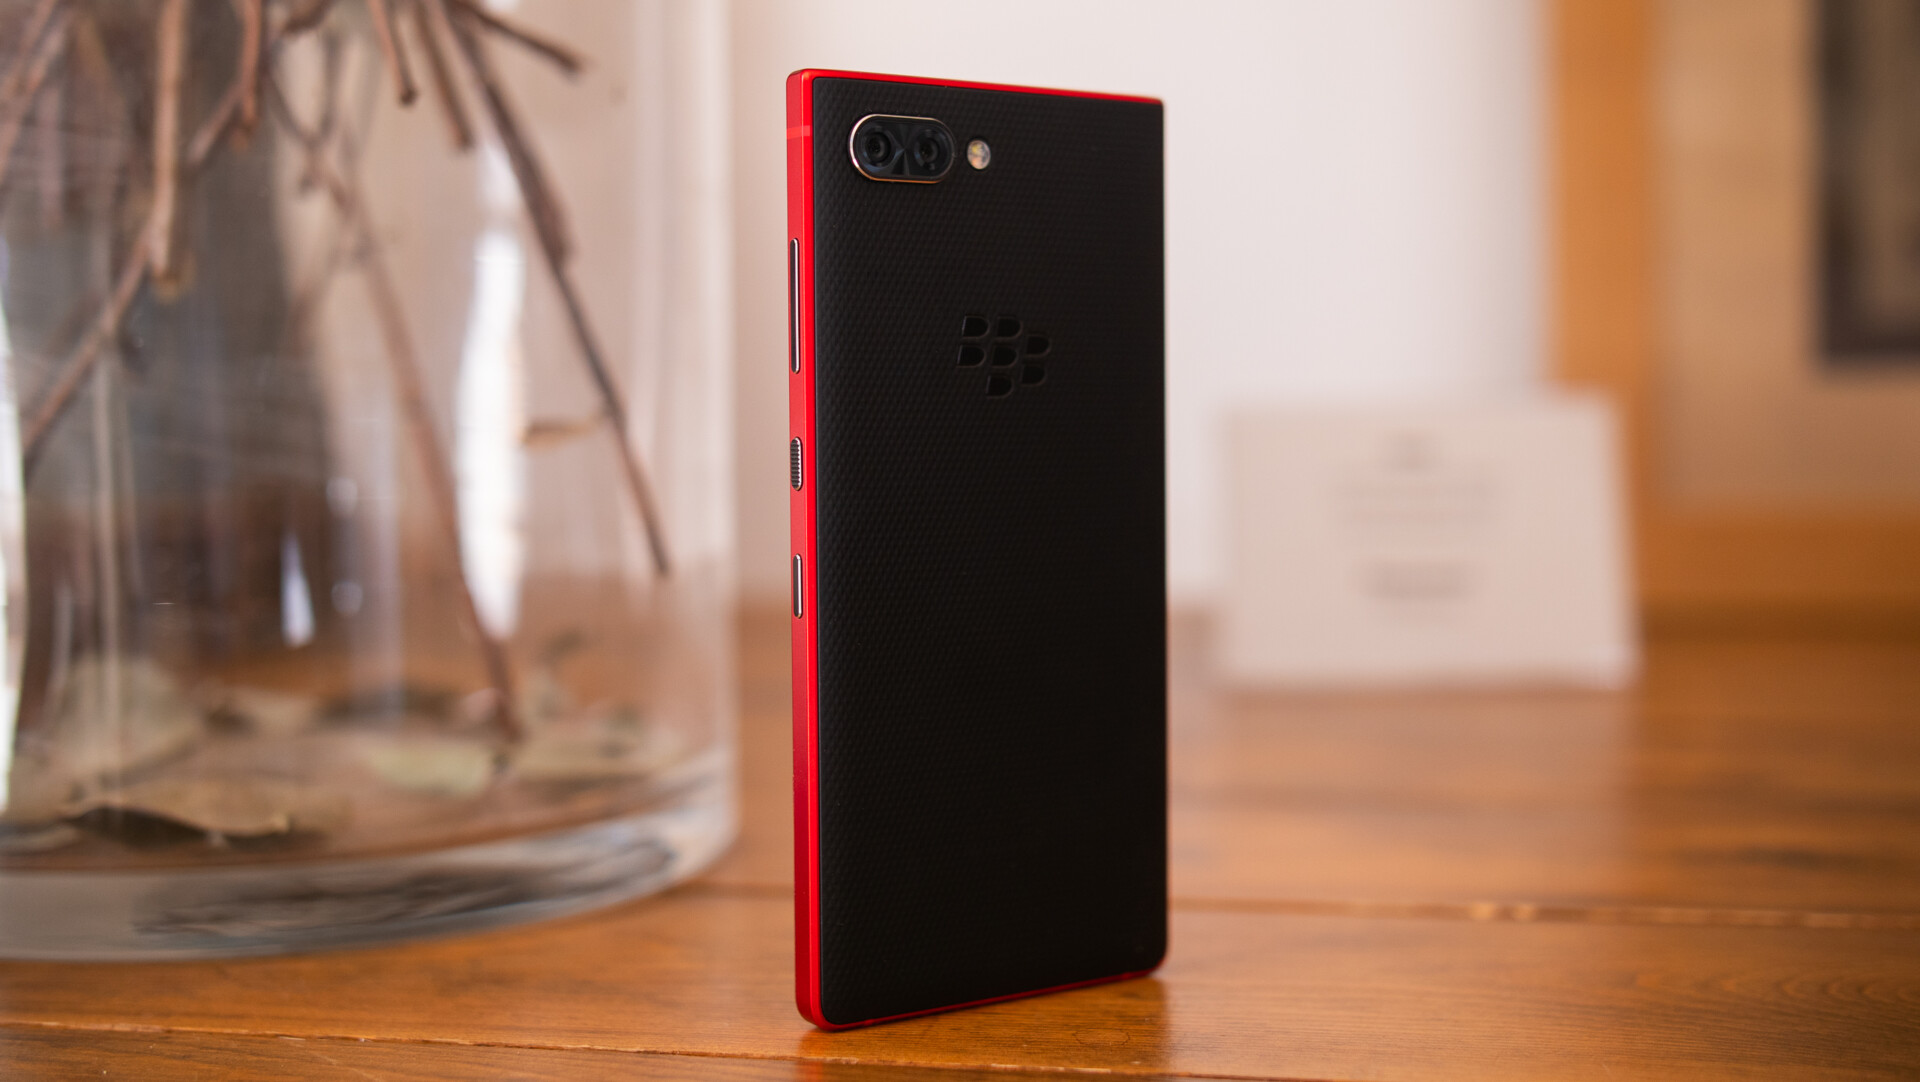 Backside photo of the Blackberry KEY2 Red Edition showing the dual cameras.